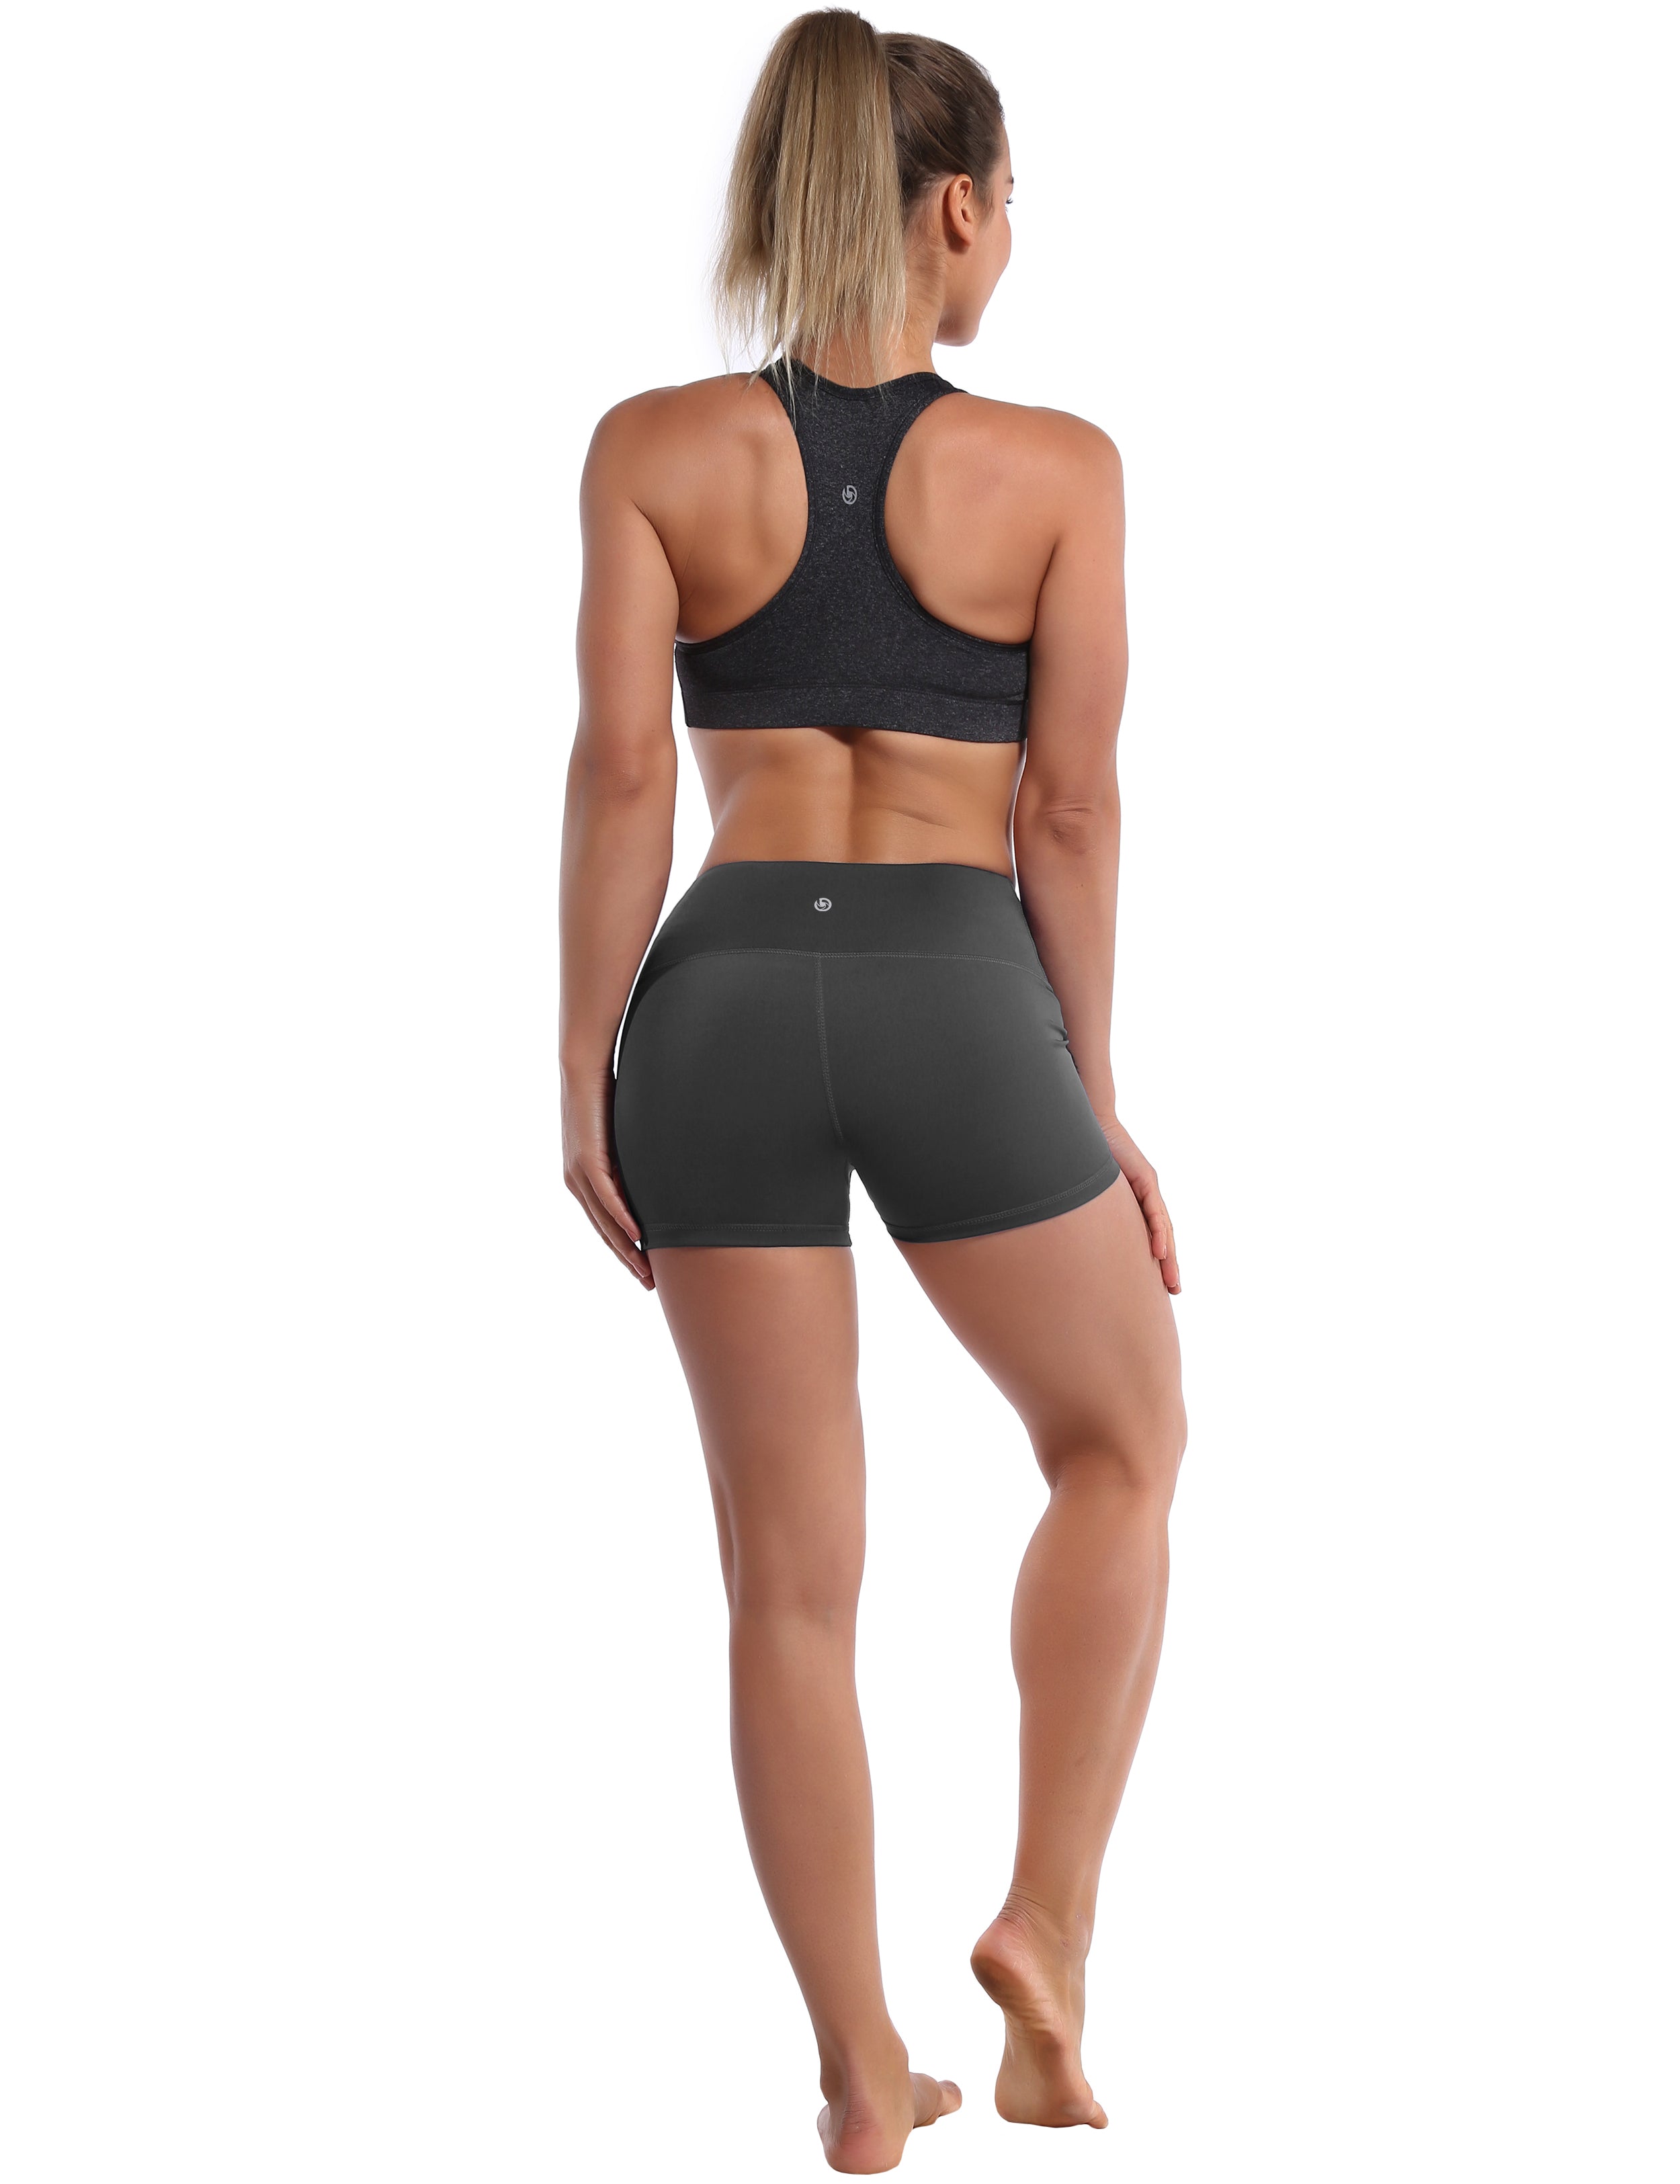 2.5" Golf Shorts shadowcharcoal Softest-ever fabric High elasticity High density 4-way stretch Fabric doesn't attract lint easily No see-through Moisture-wicking Machine wash 75% Nylon, 25% Spandex